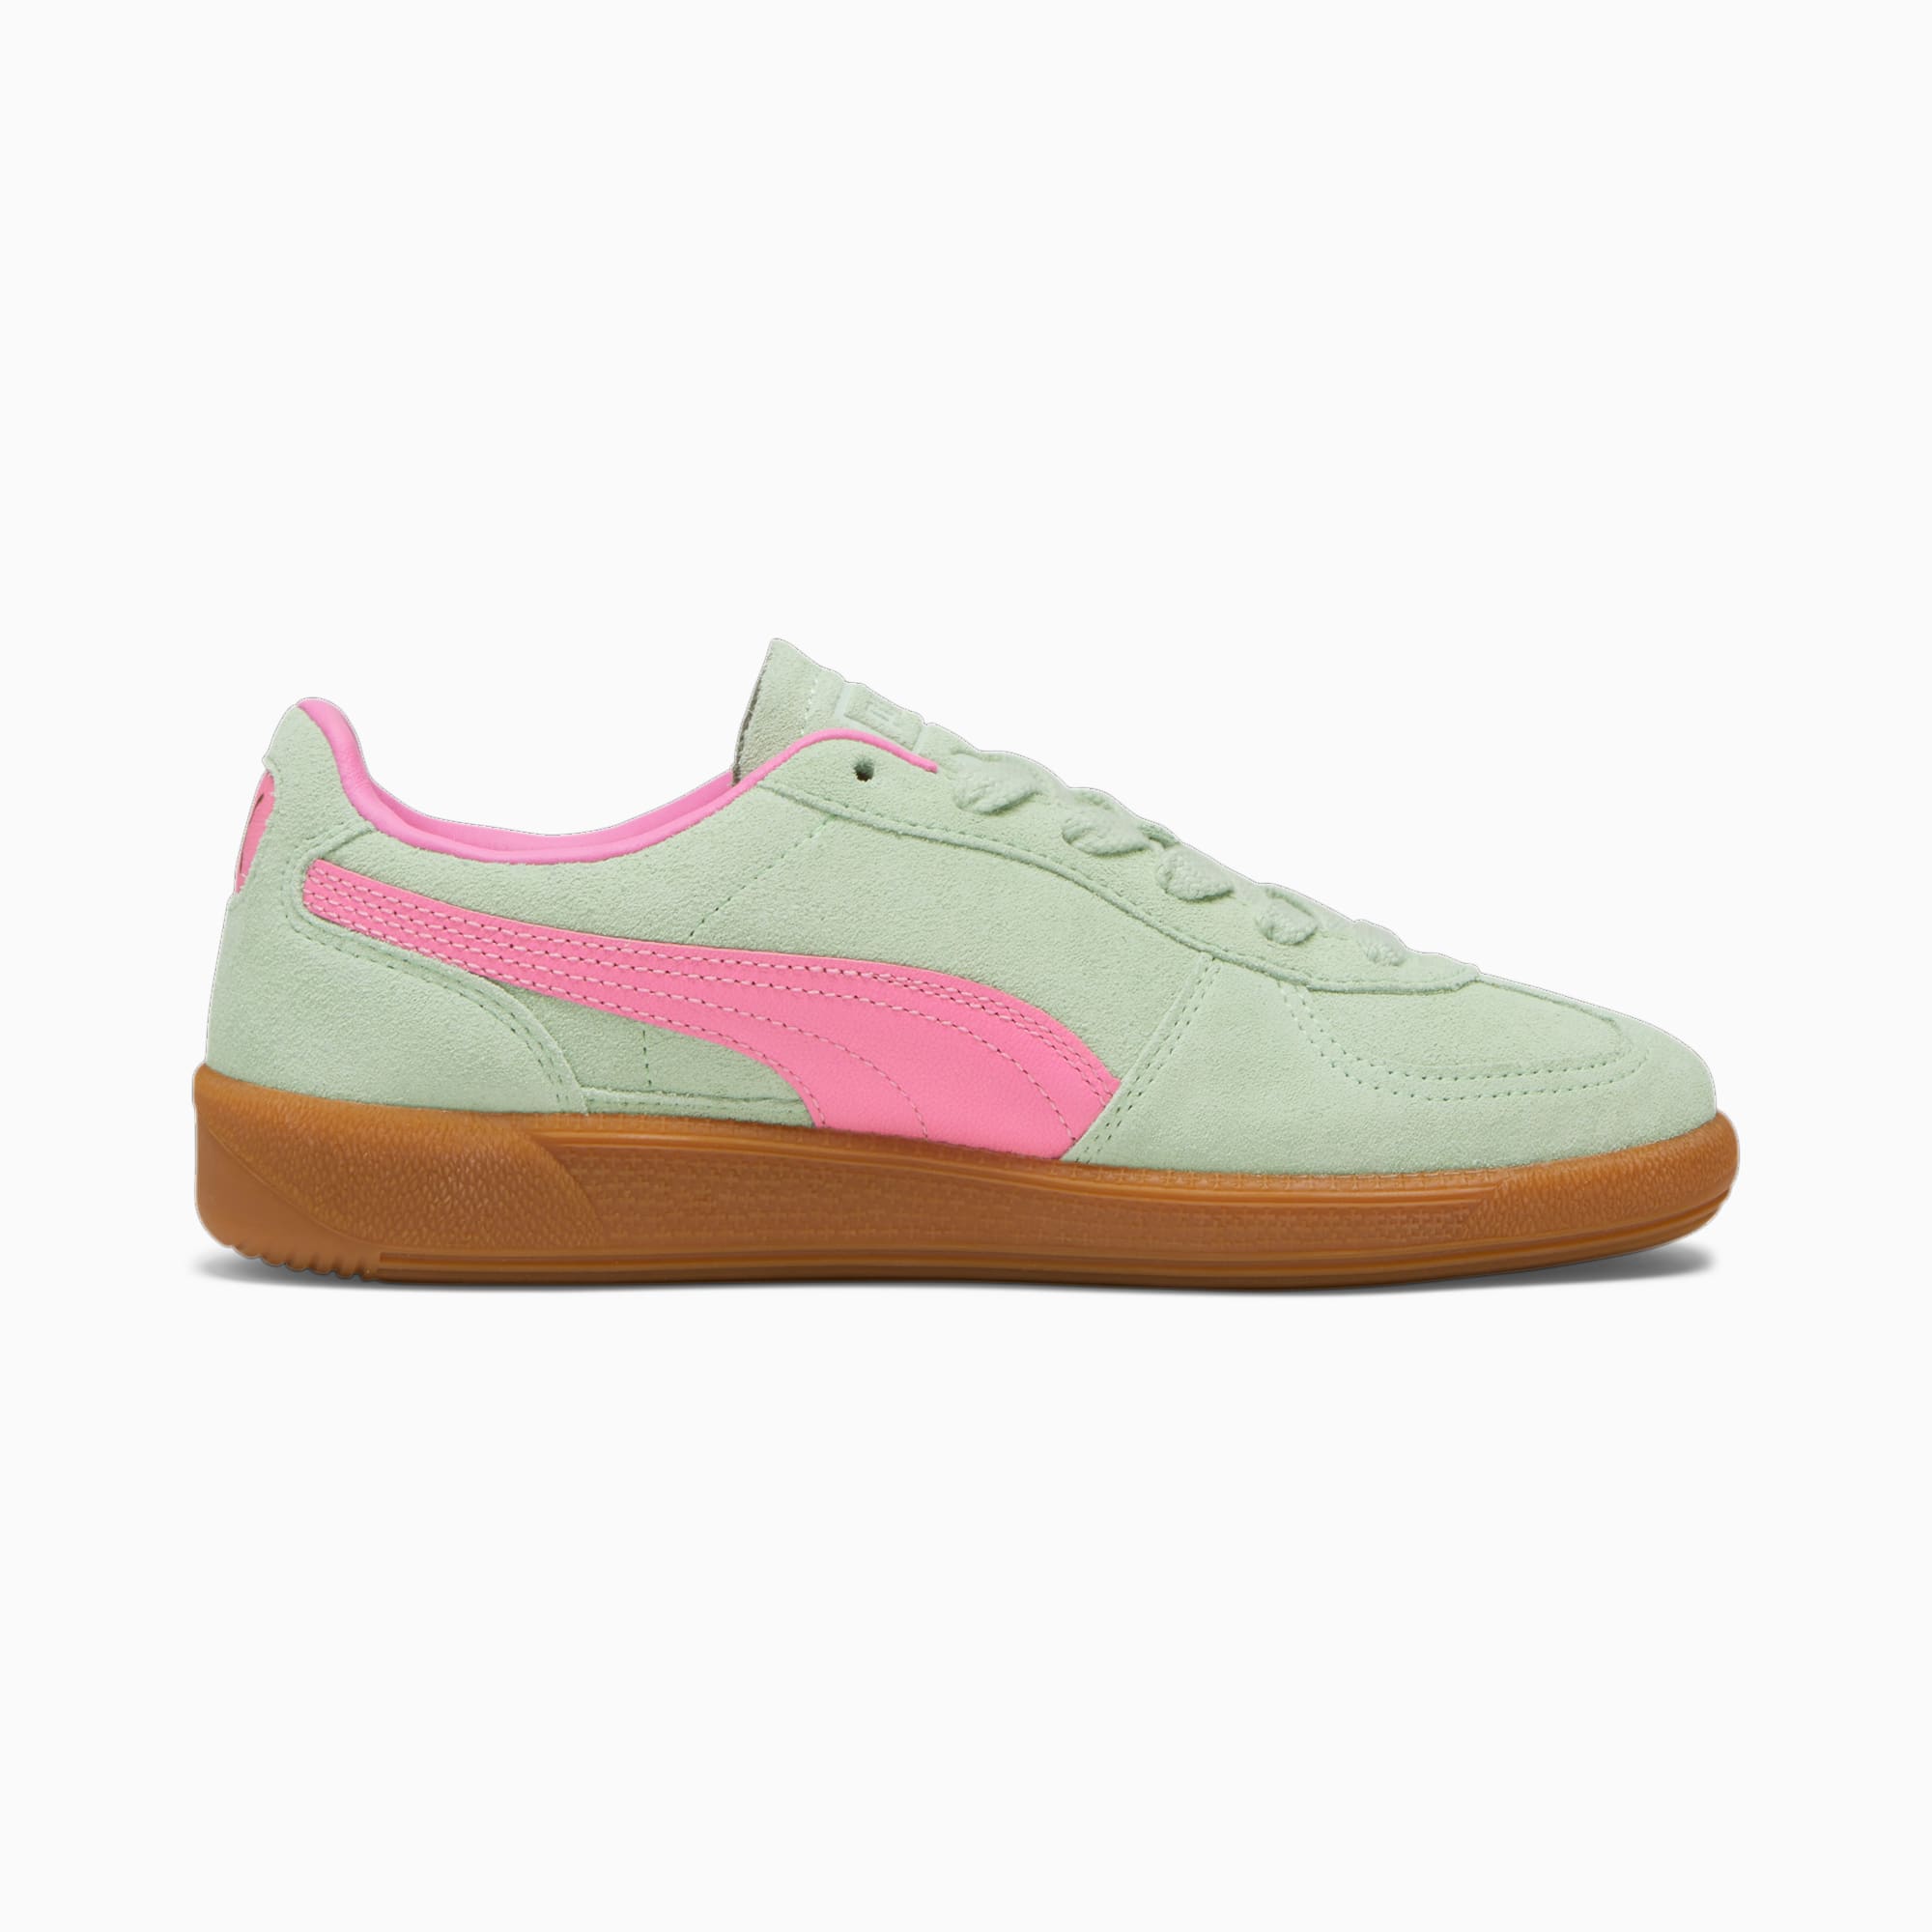 PUMA Chaussure Sneakers Palermo, Rose